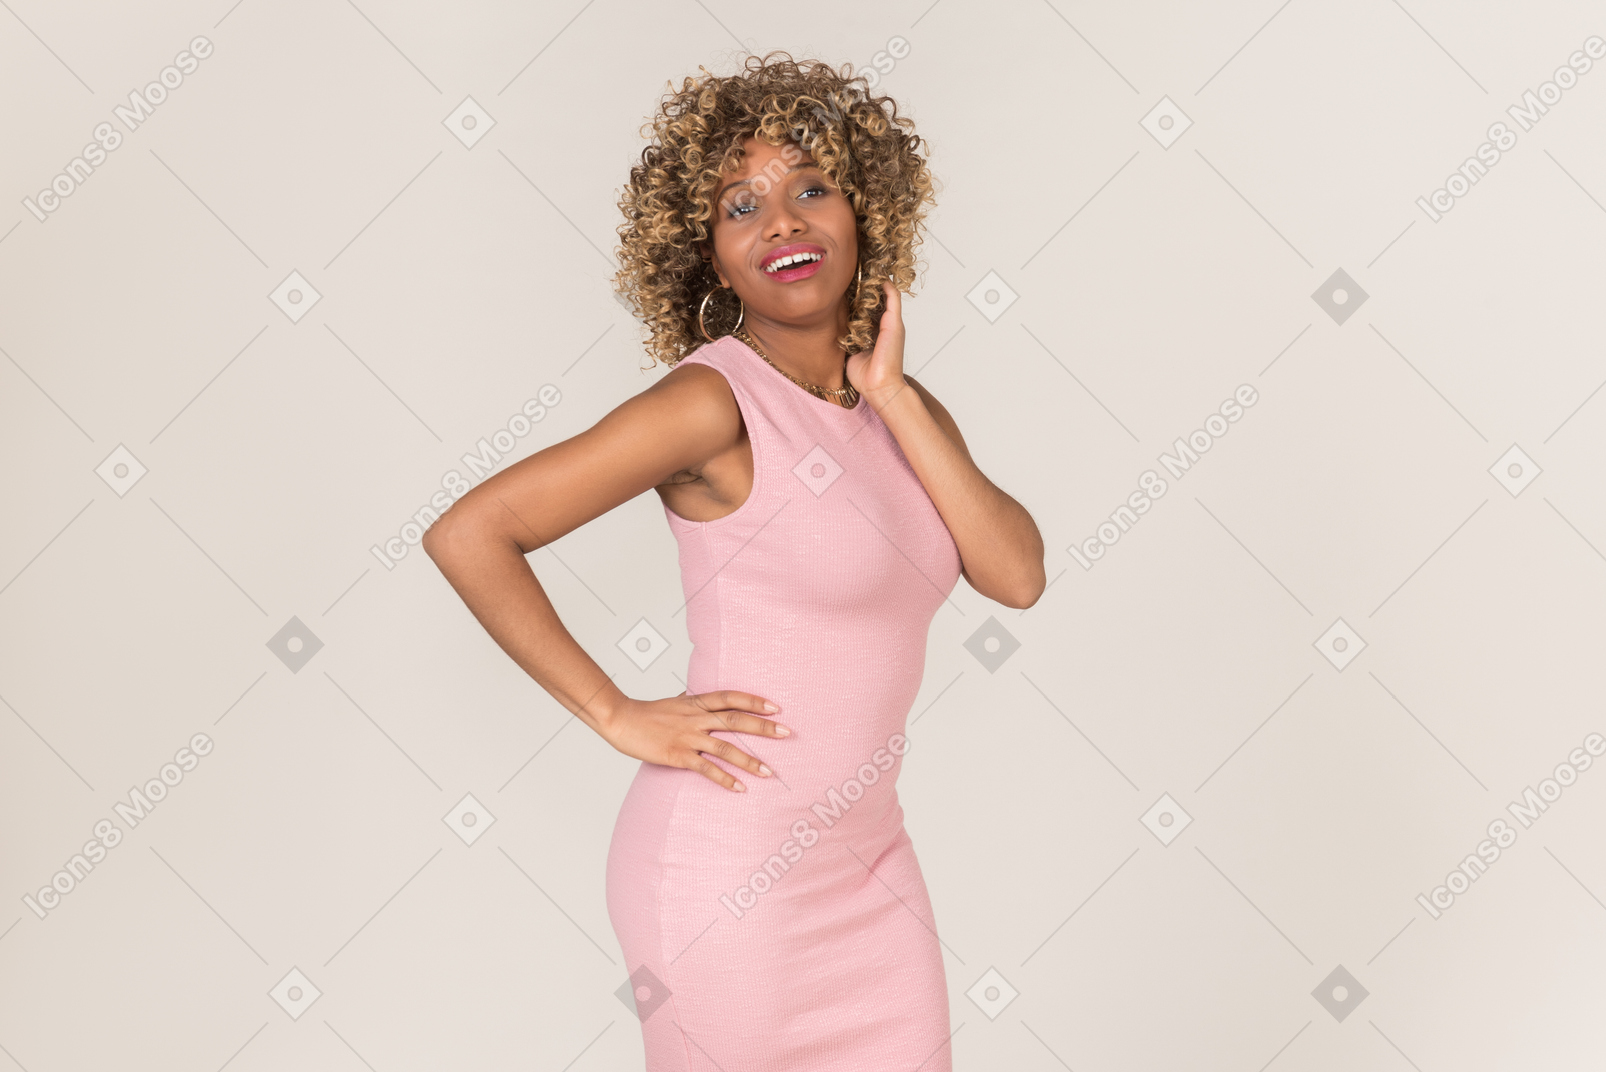 A woman in pink dress and hand on her waist fixing her hair